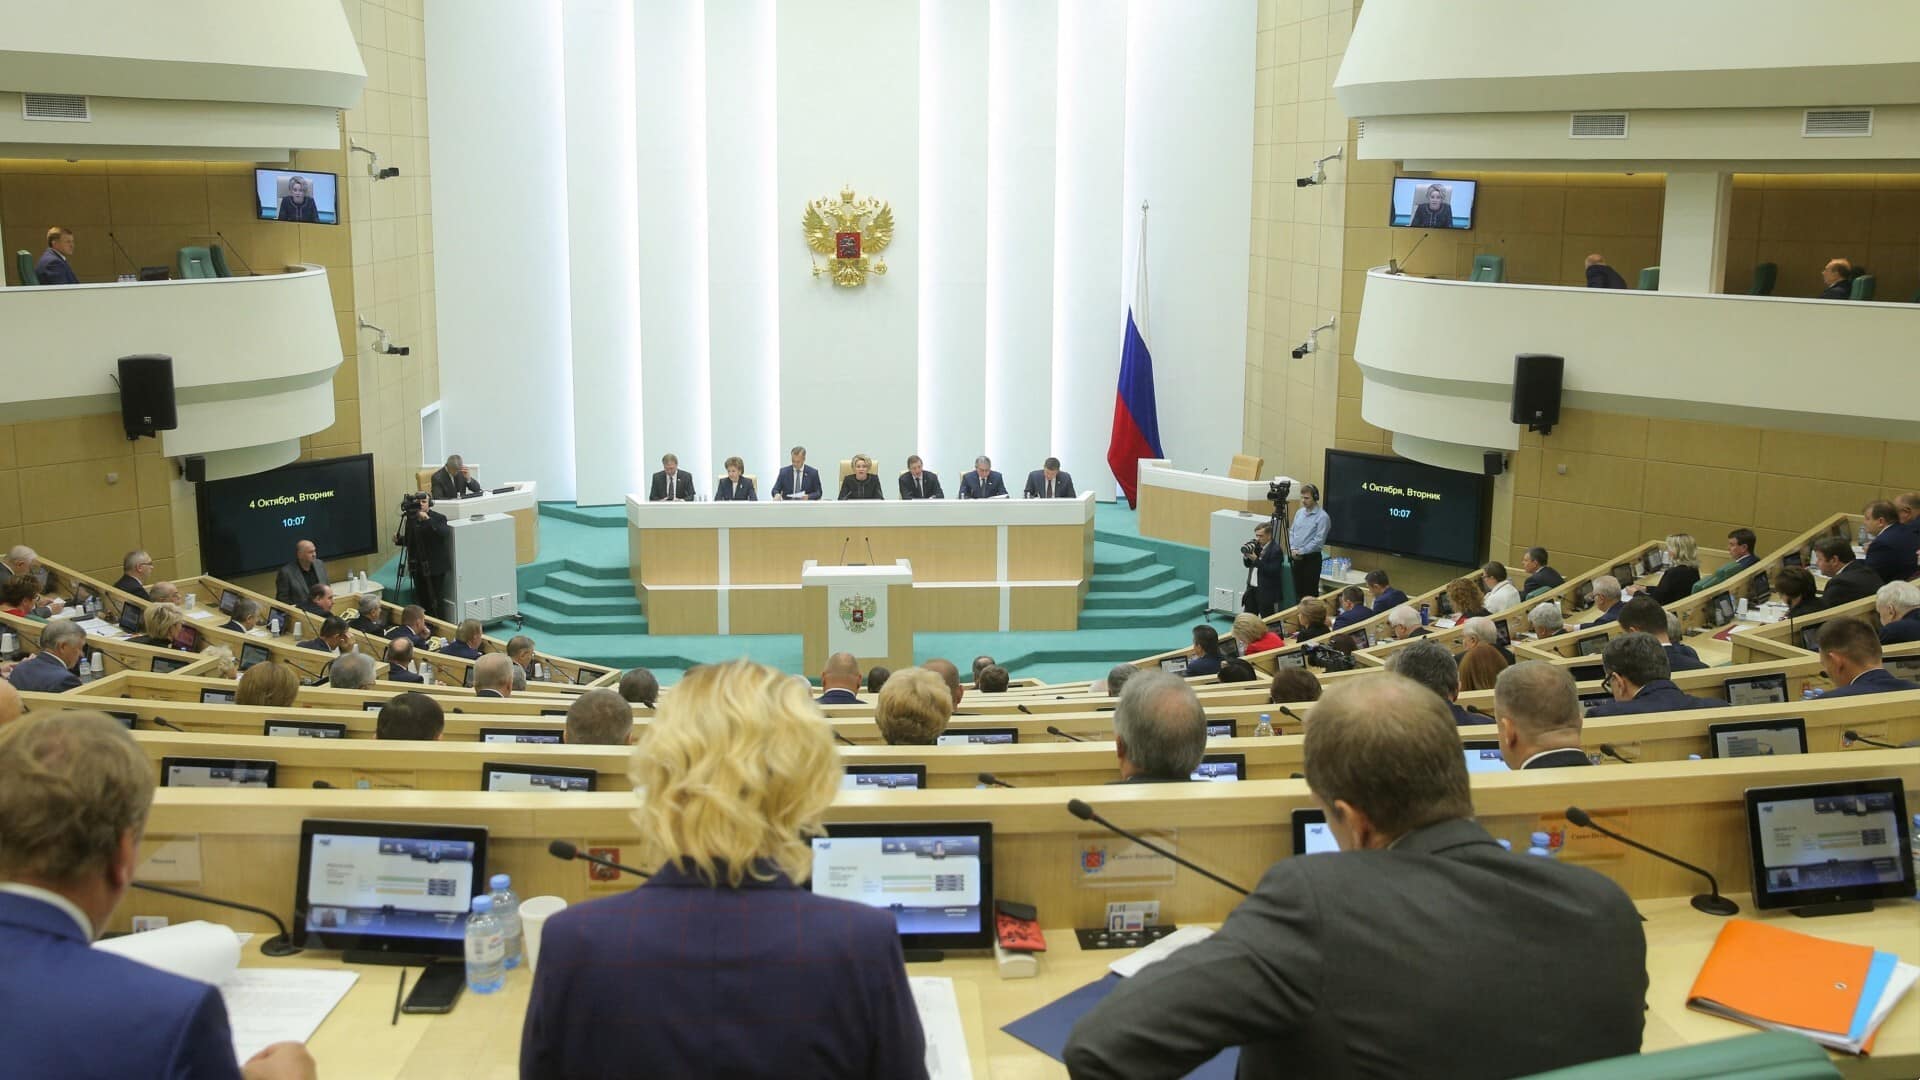 The Federation Council in session. Photo: Federation Council.